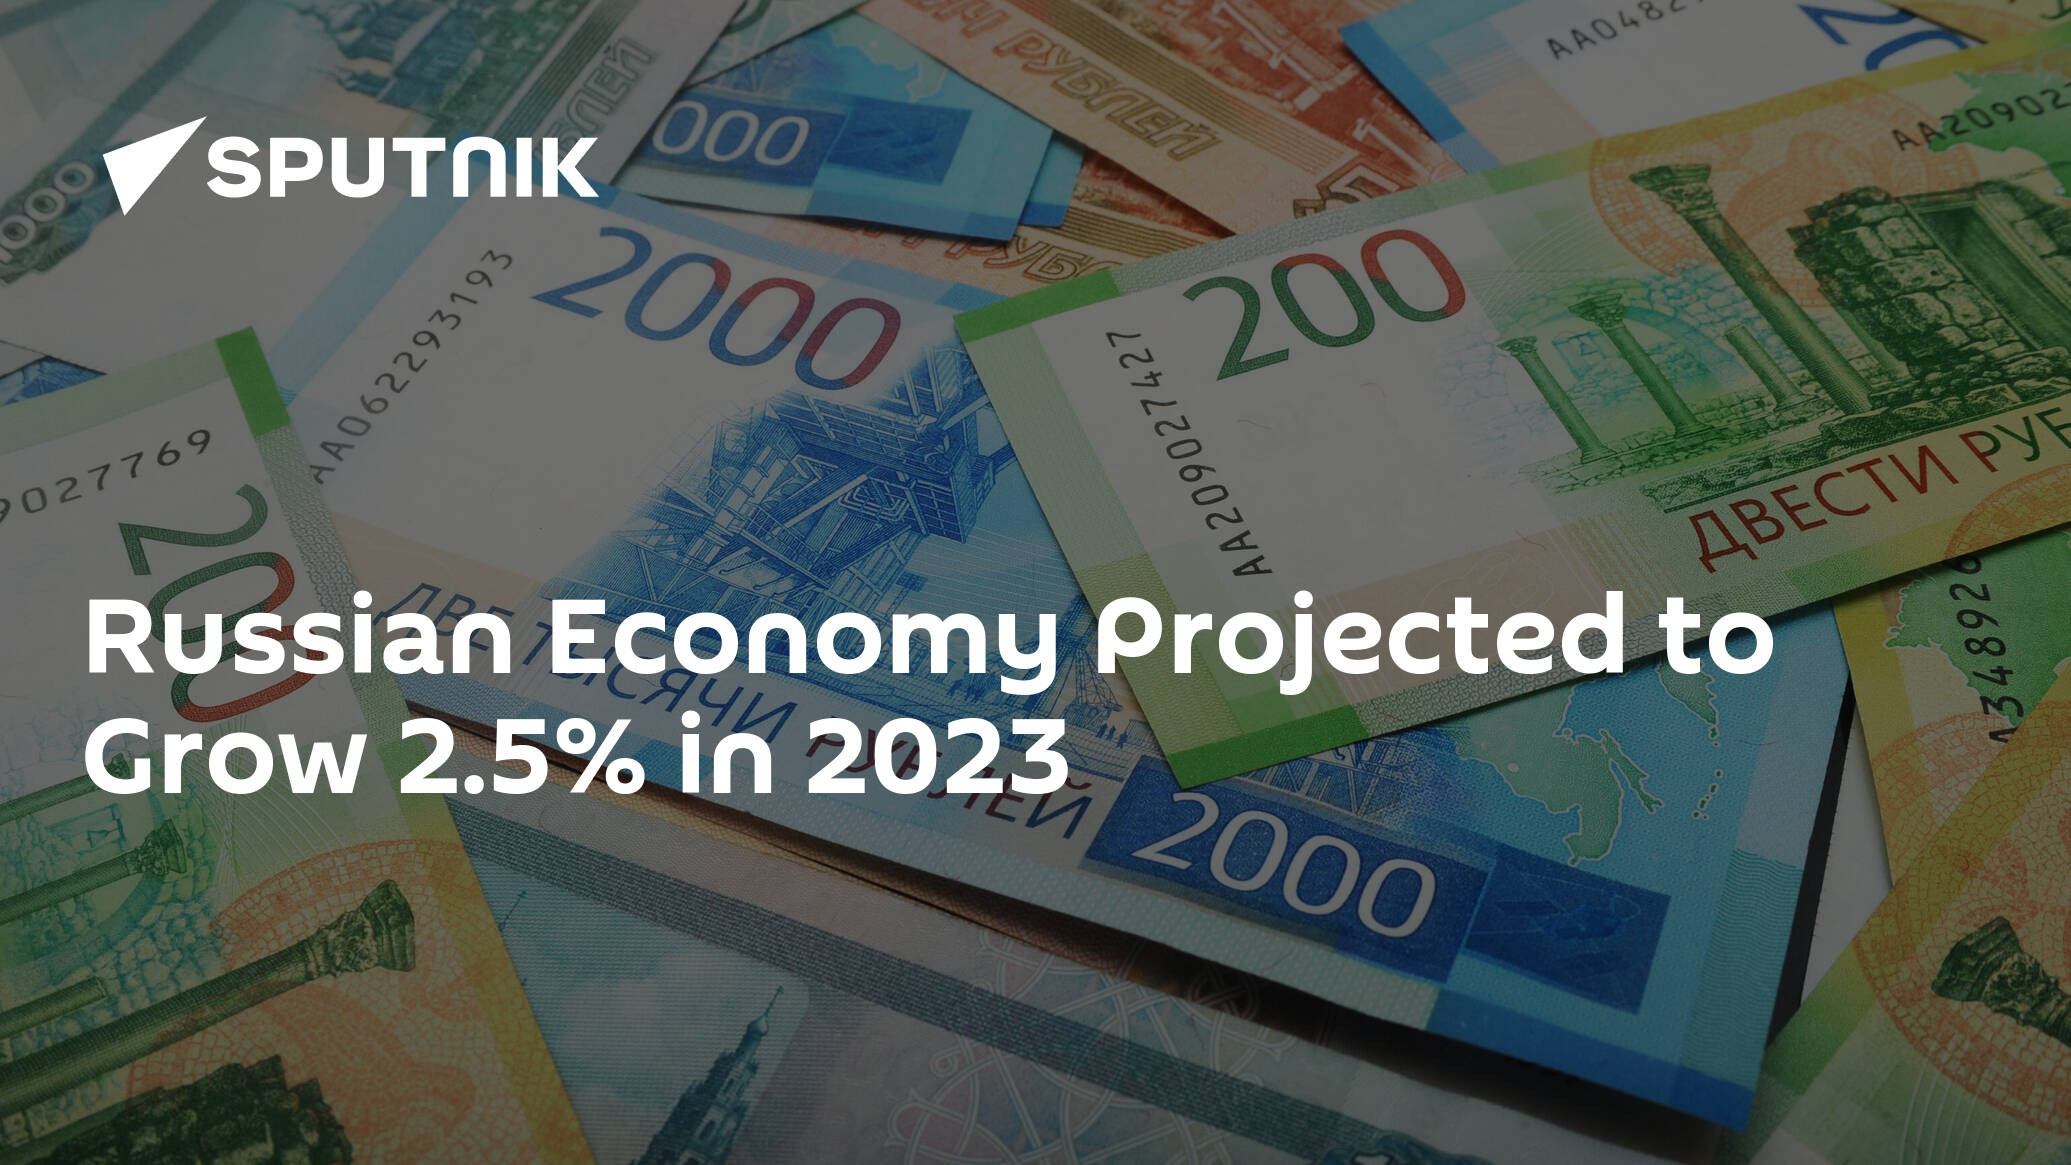 Russian Economy Projected to Grow 2.5% in 2023